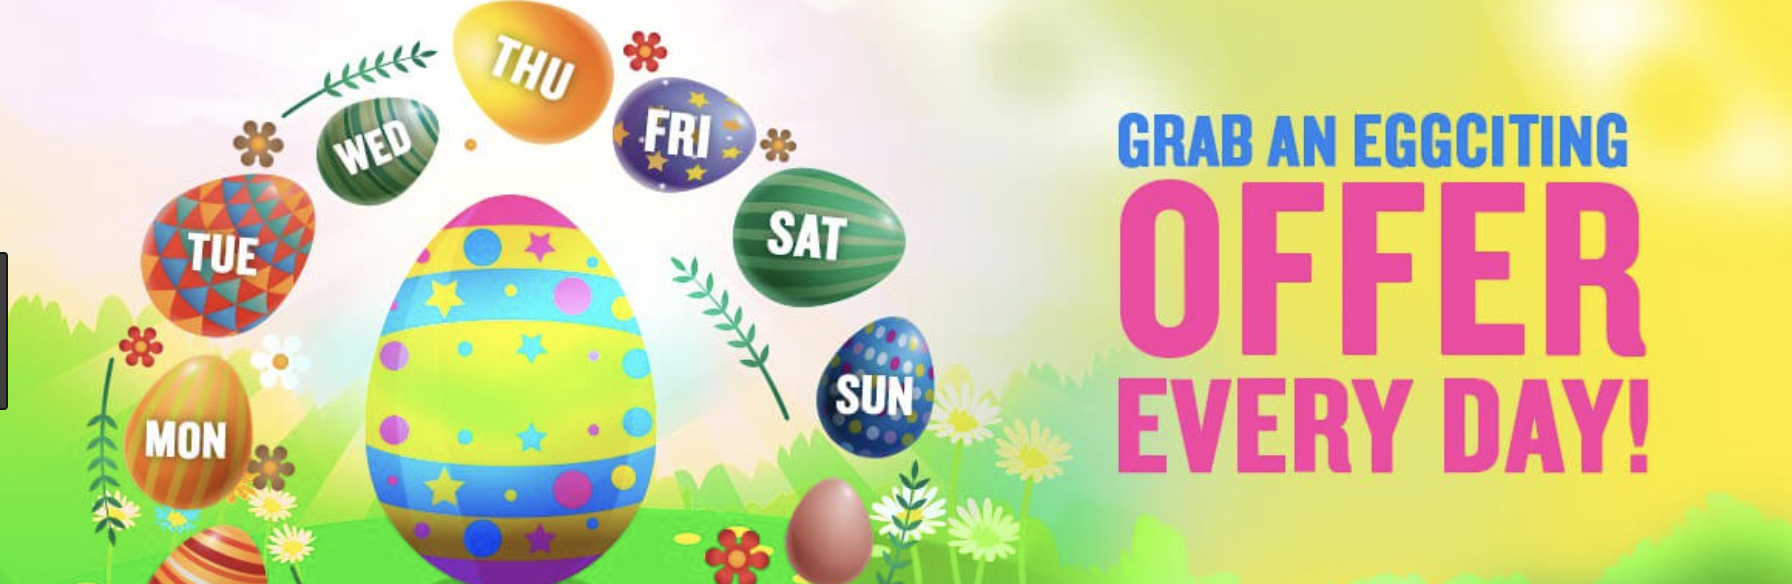 Don’t miss out on these Eggs-traordinary offers at Kingdom Ace Casino